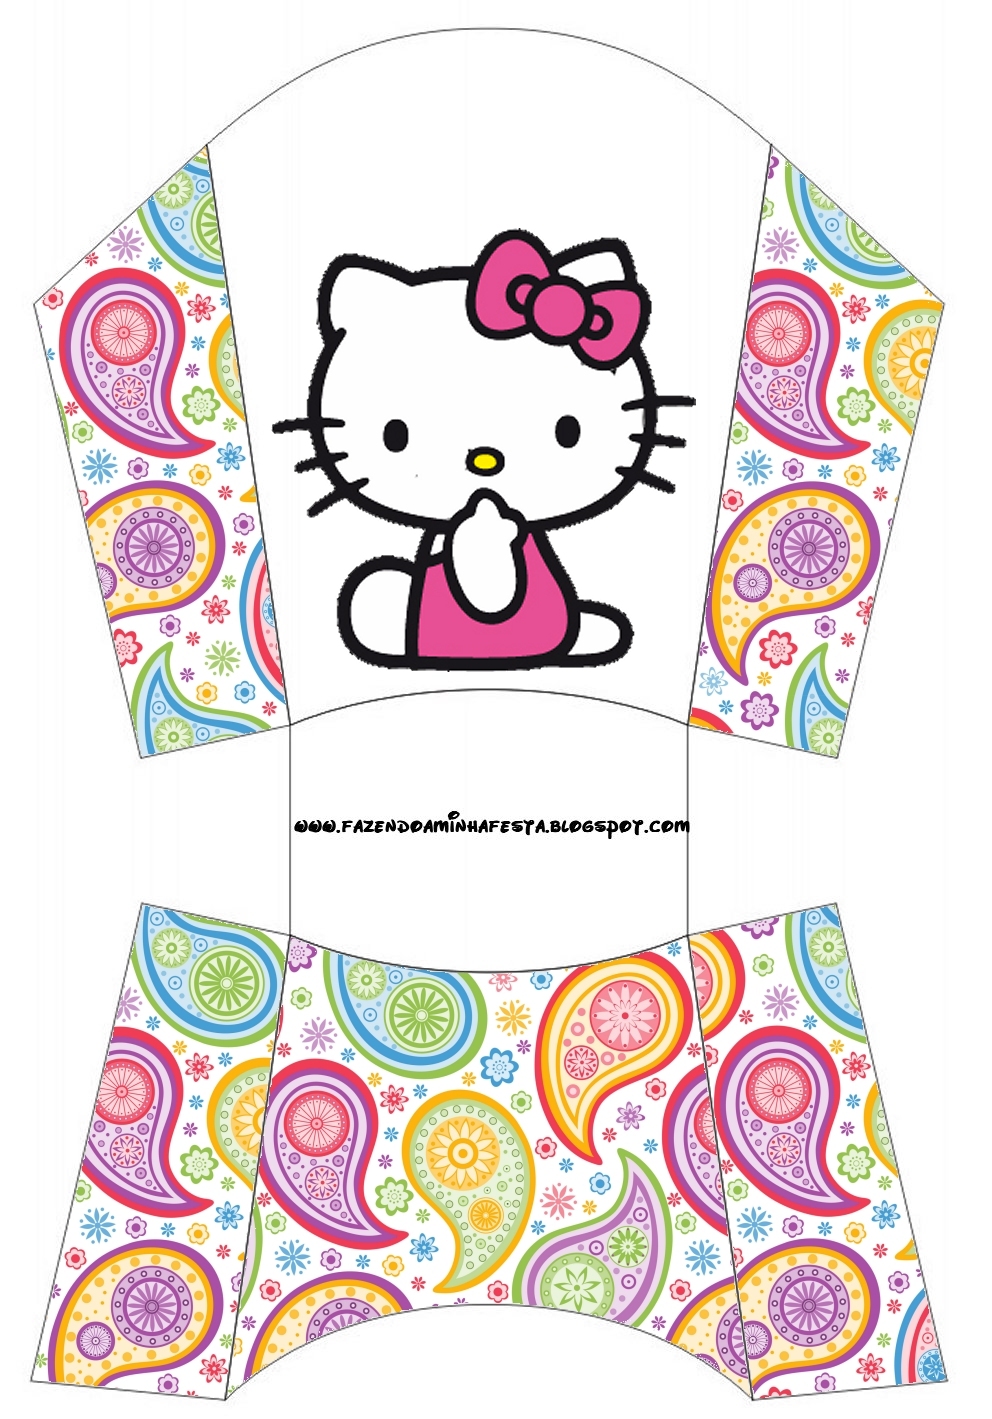 Hello Kitty: Free Printable Boxes. | Oh My Fiesta! in english